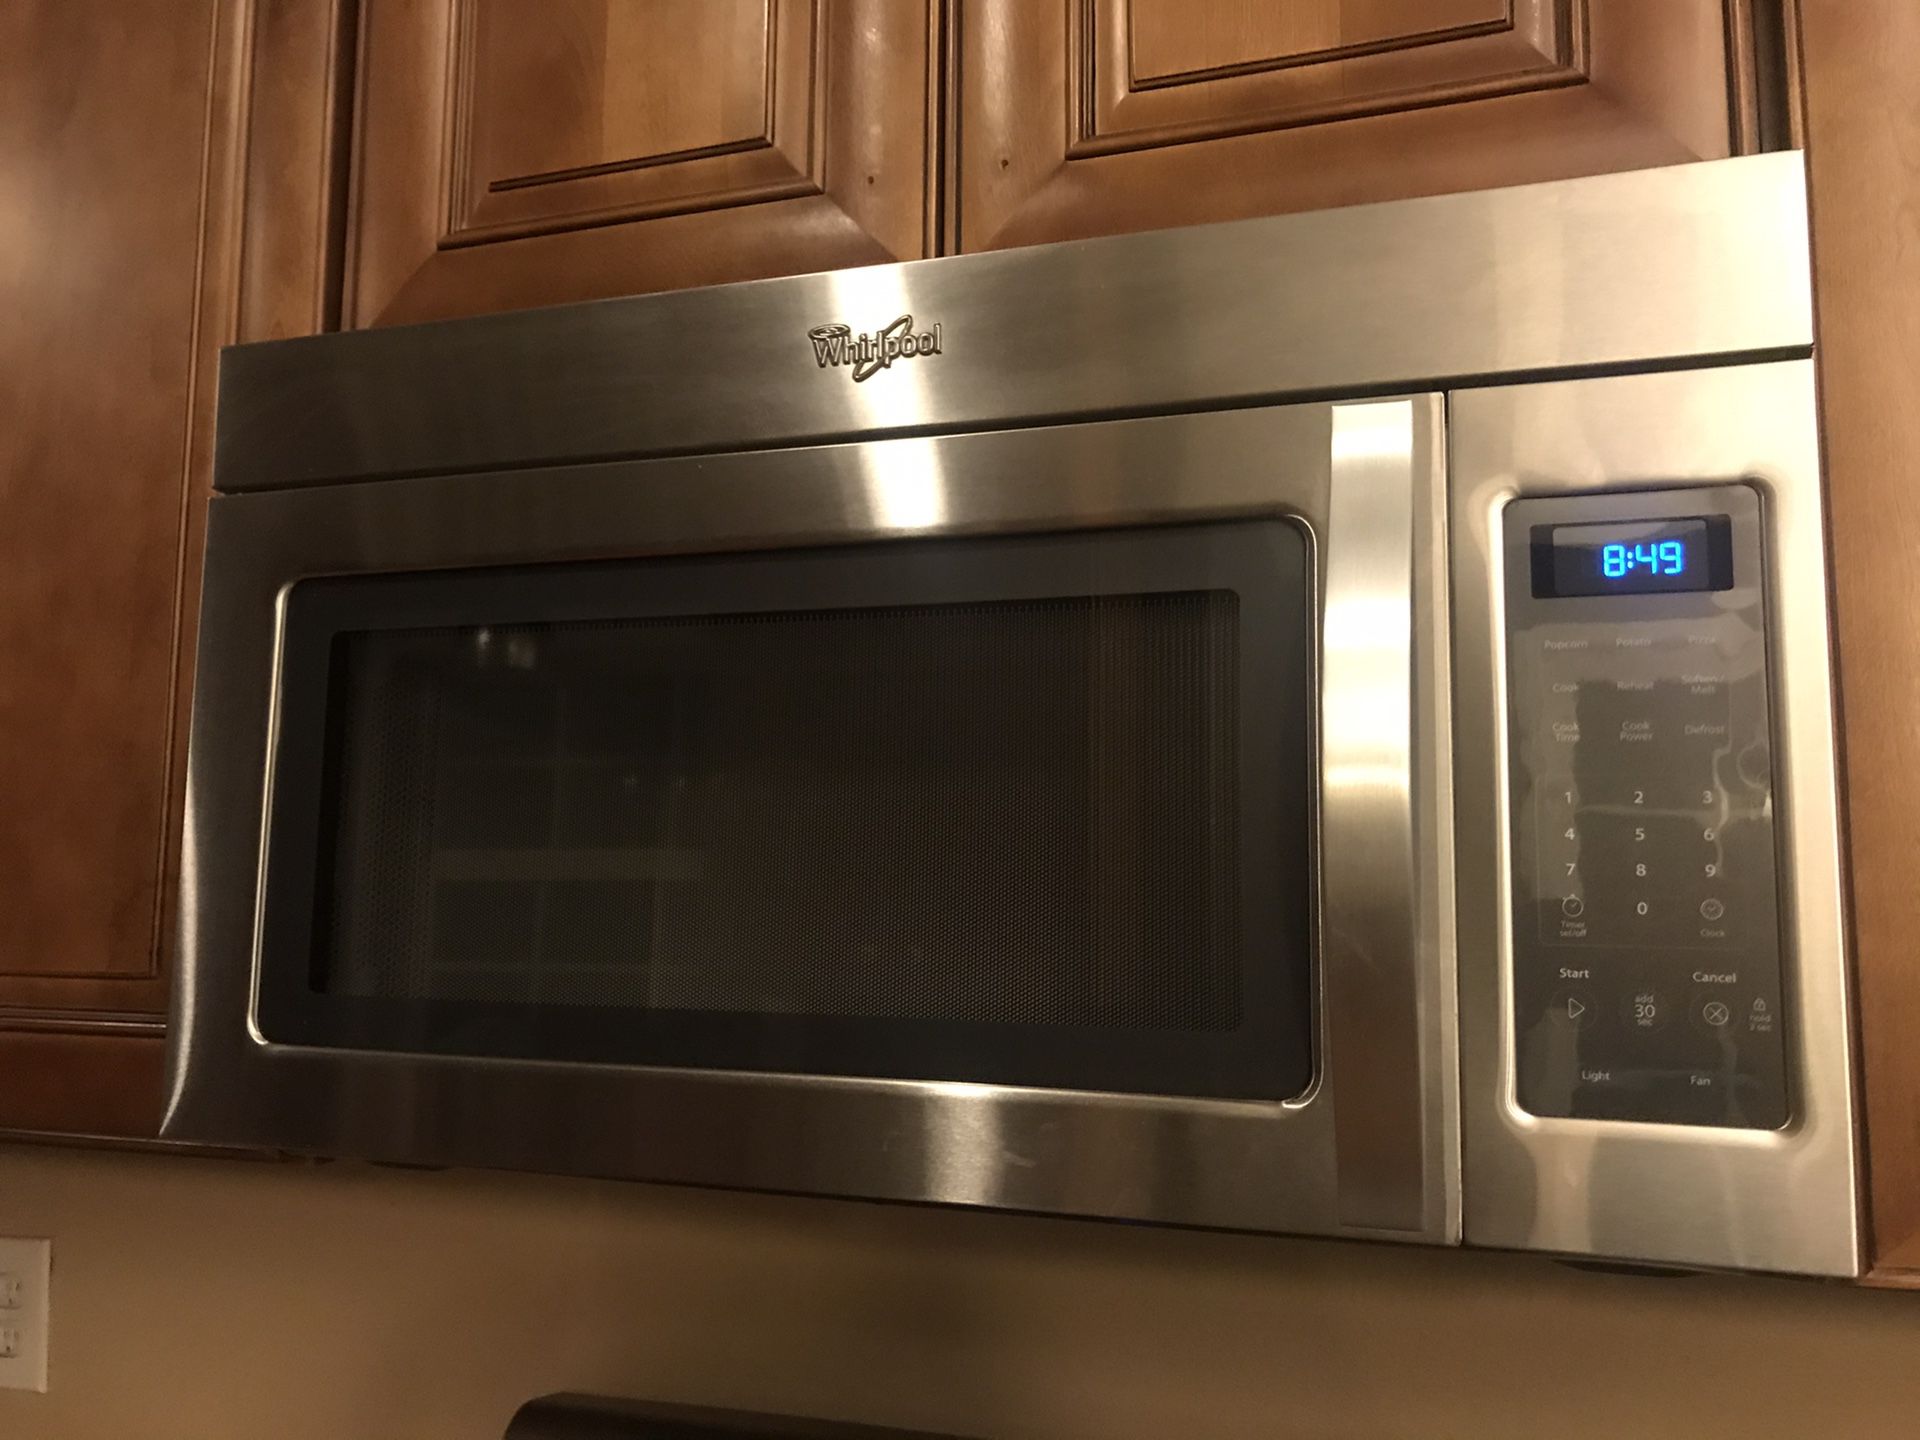 Whirlpool microwave over range with exhaust